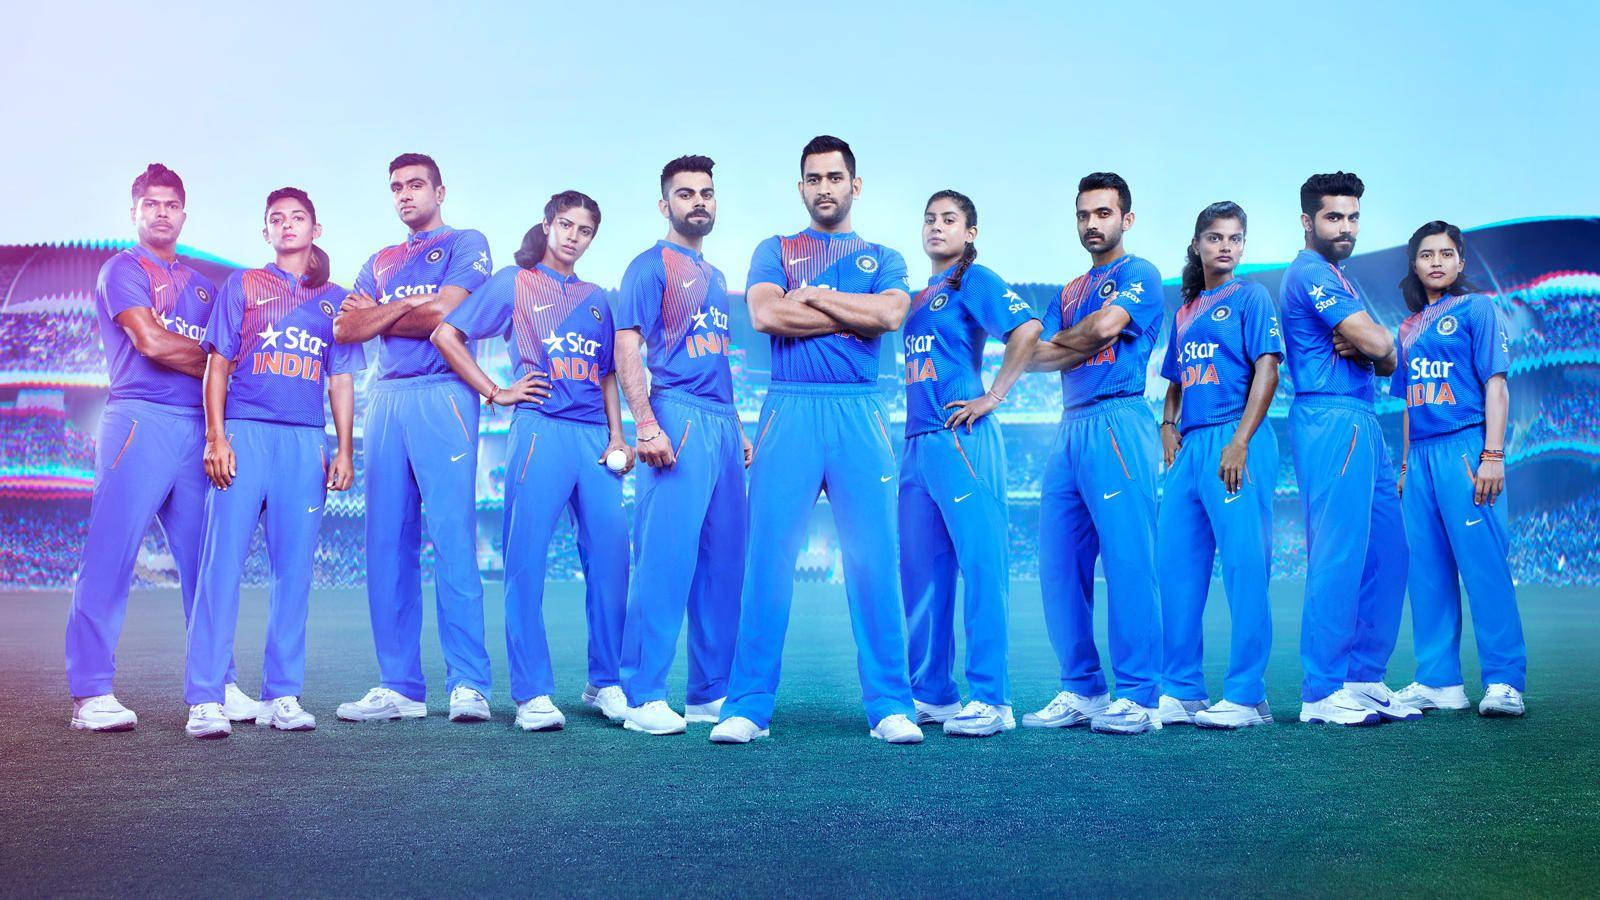 Boys And Girls Of The Indian Cricket Team Wallpaper